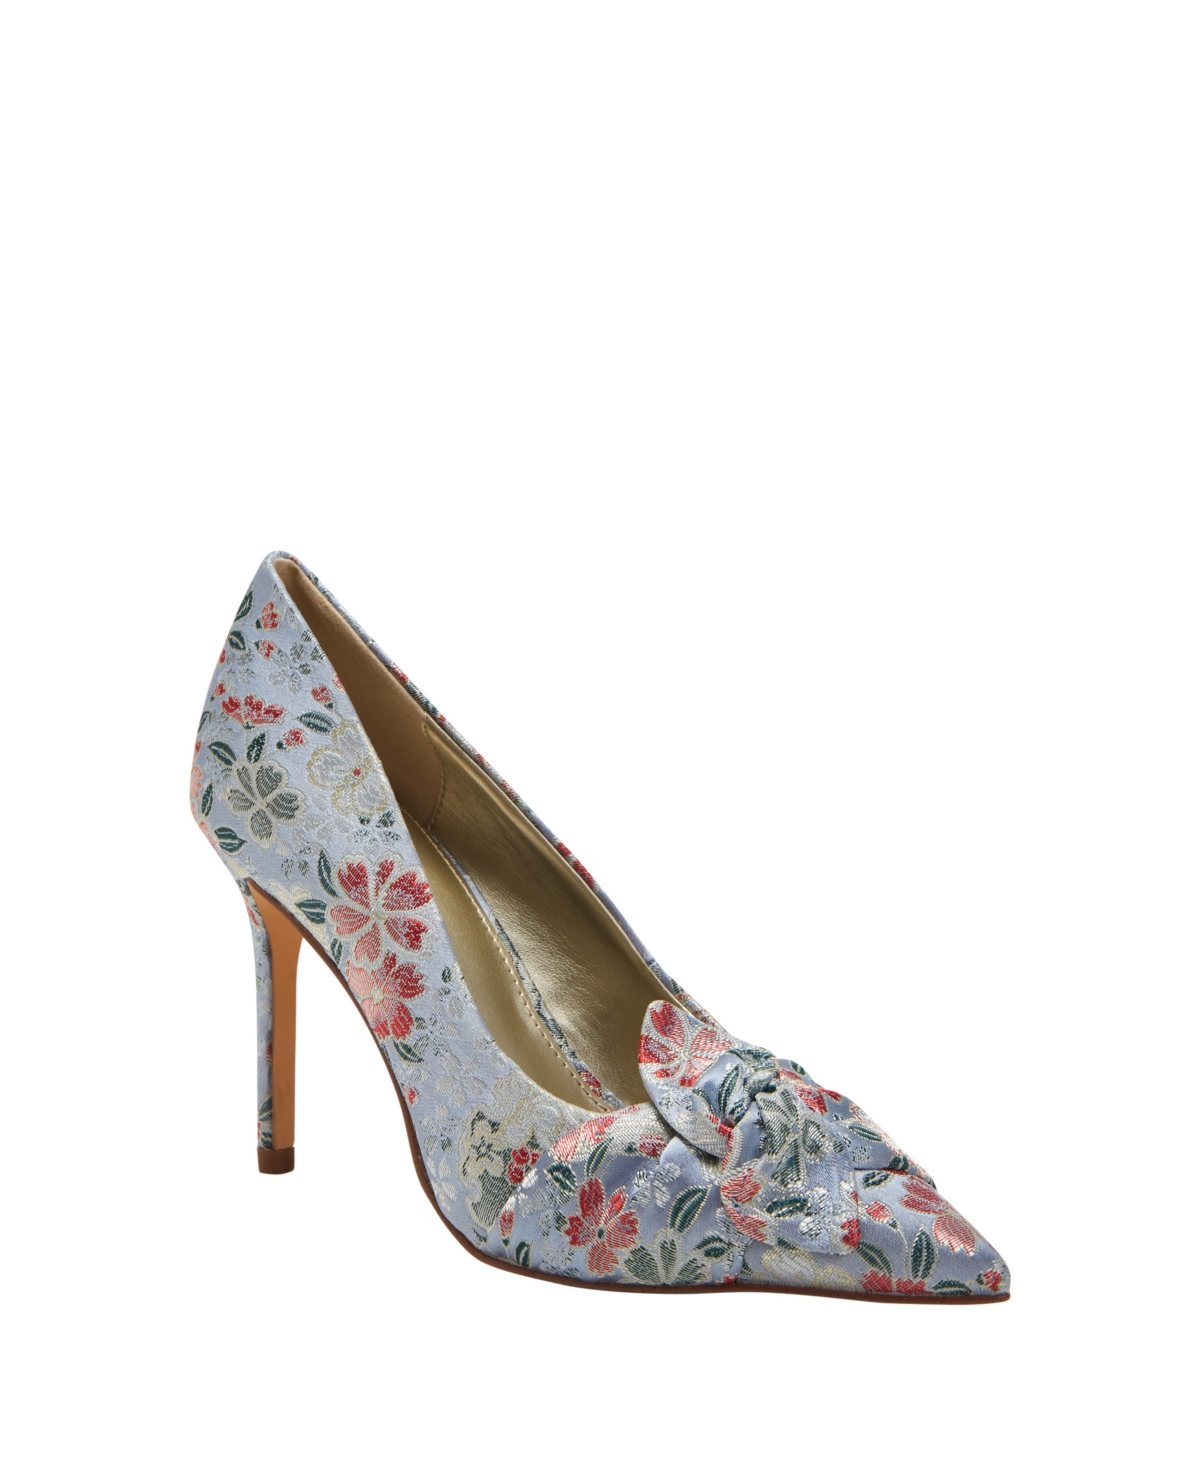 Women's Revival Bow Pointed Toe Pumps - Blue Multi